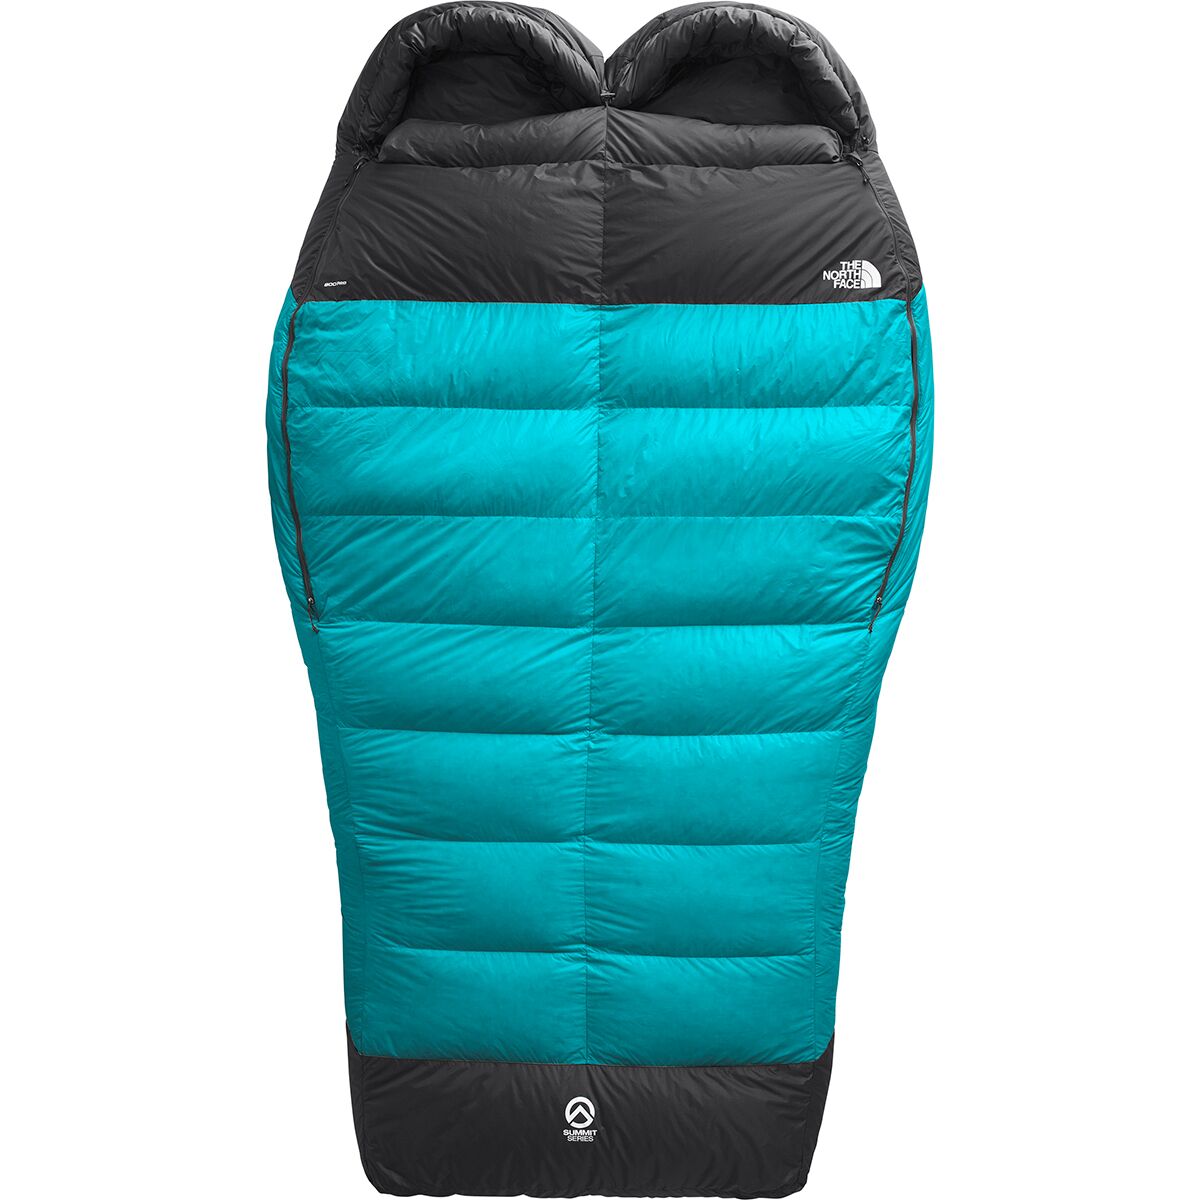 The North Face Inferno Double Sleeping Bag: 15F Down